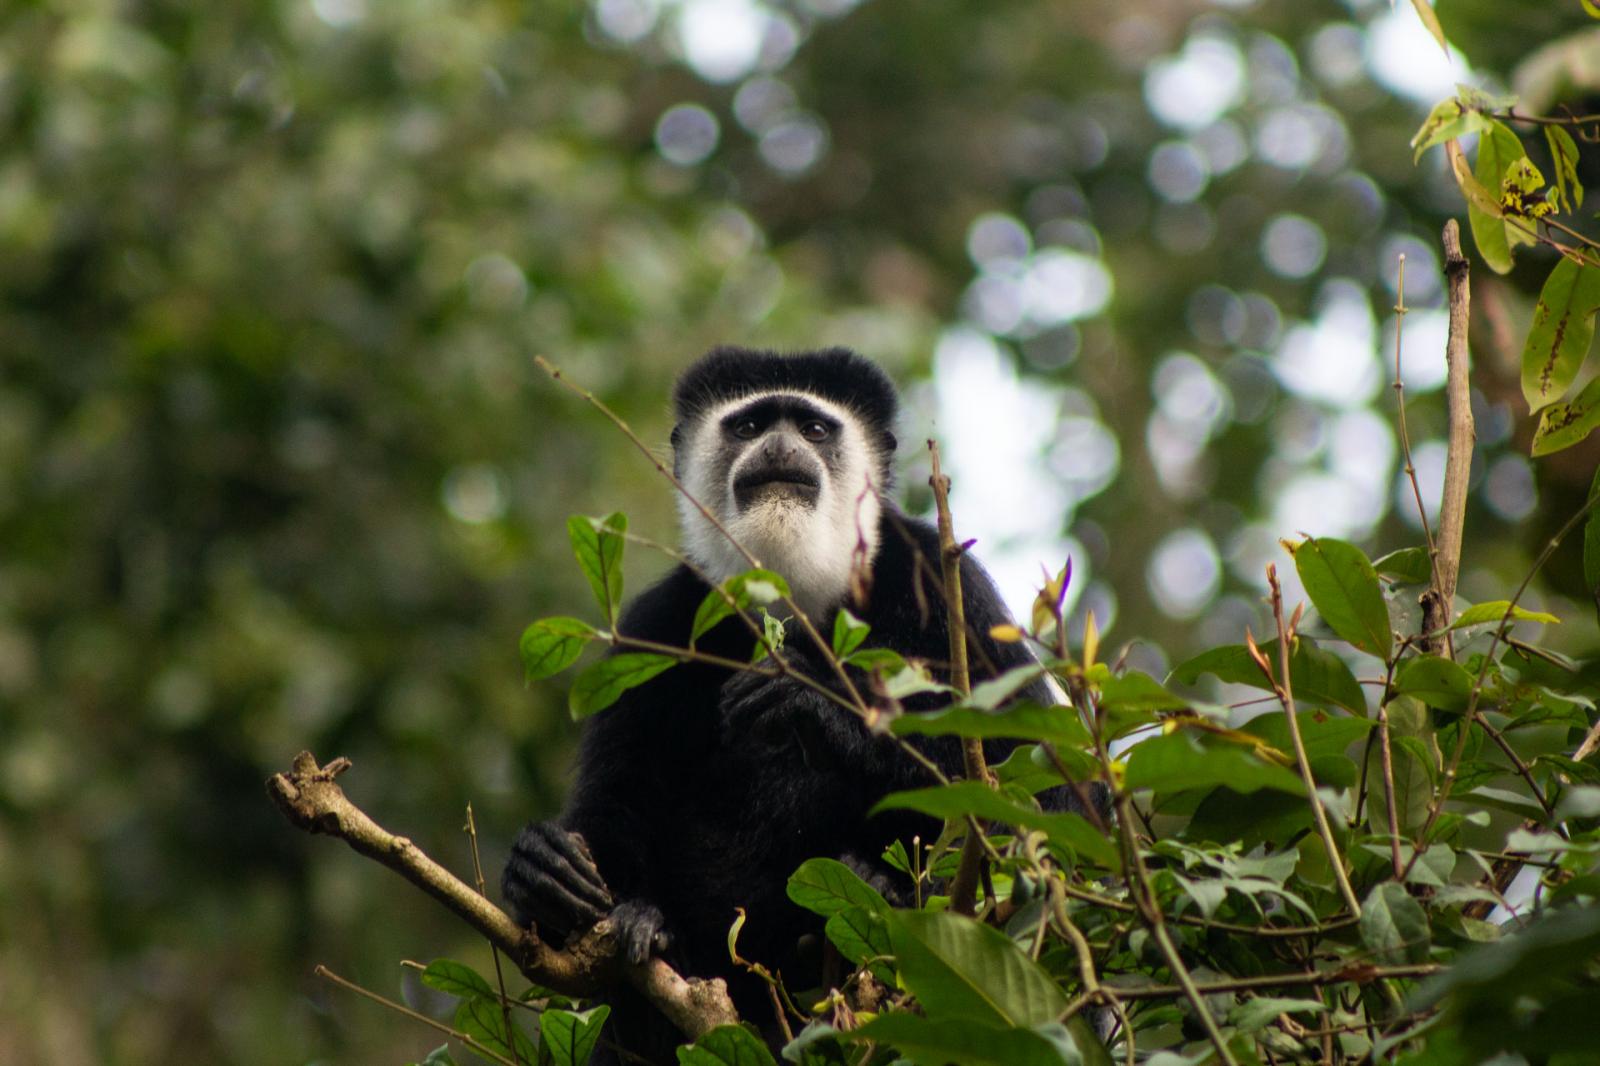 Vanessa Mulondo | A Passion for Nature - A Colobus monkey rests in a tree in Kibale National Park.